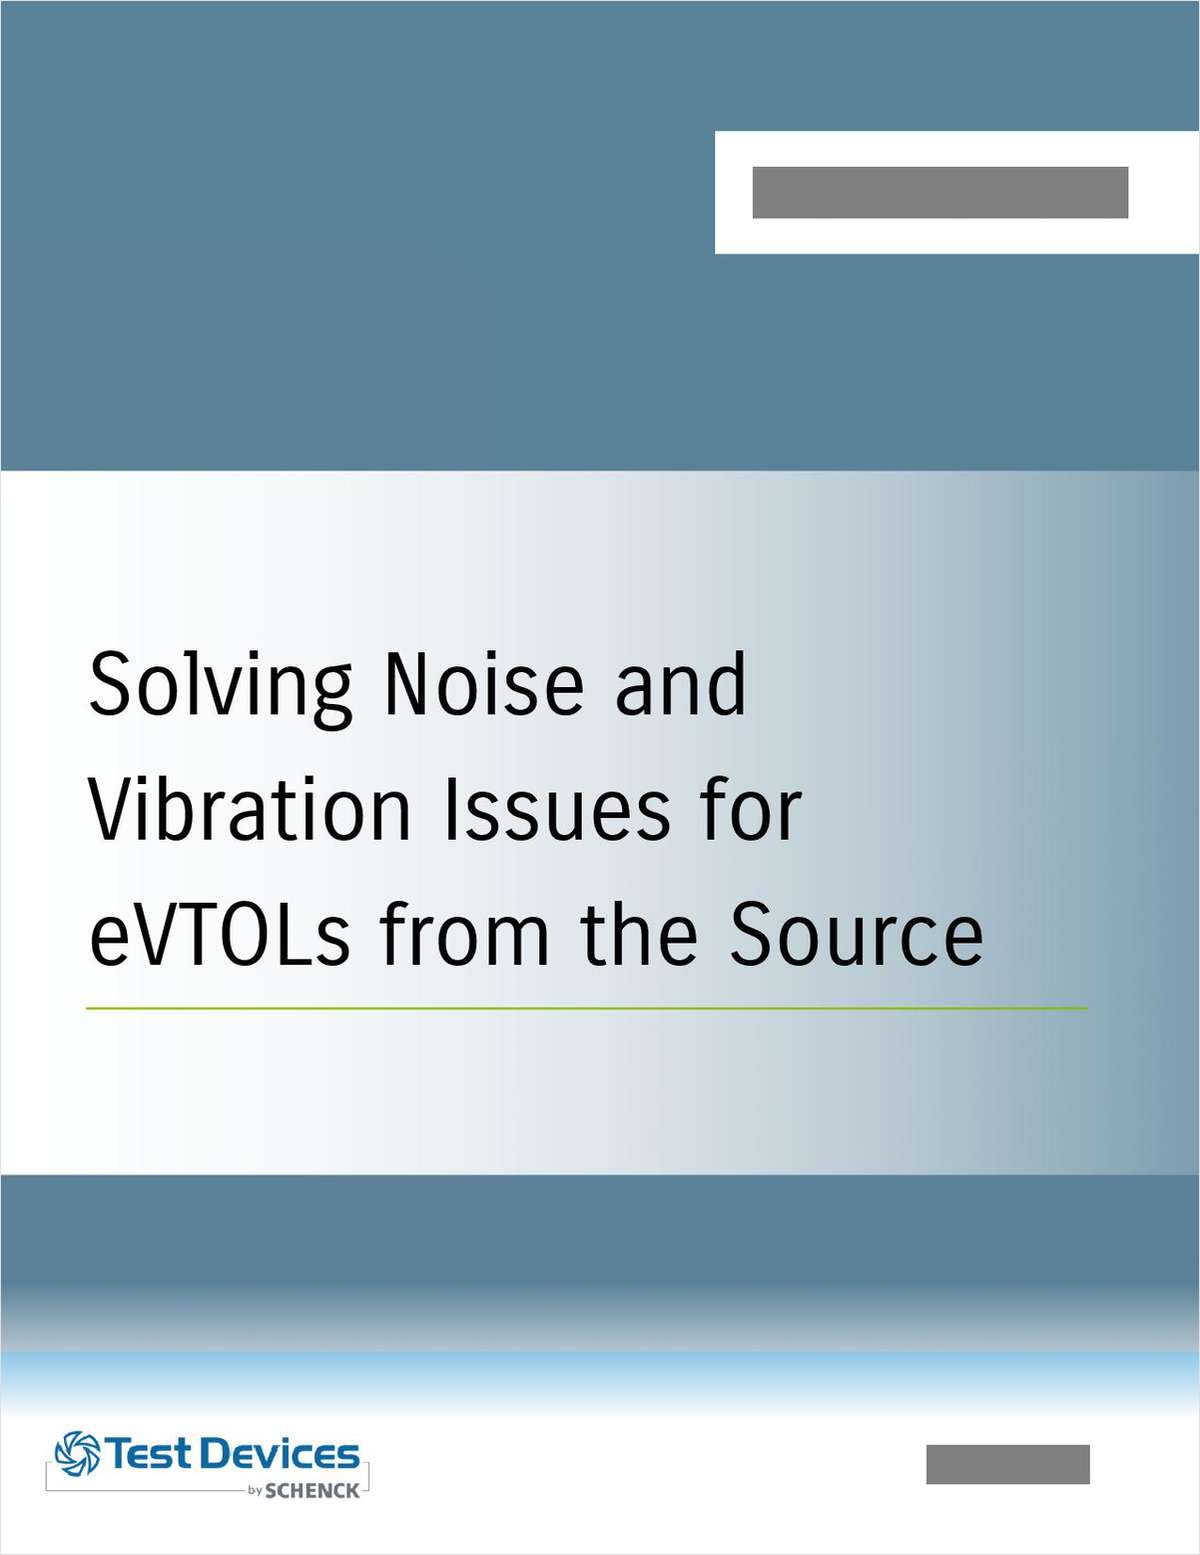 Solving Noise & Vibration Issue for eVTOLs from the Source